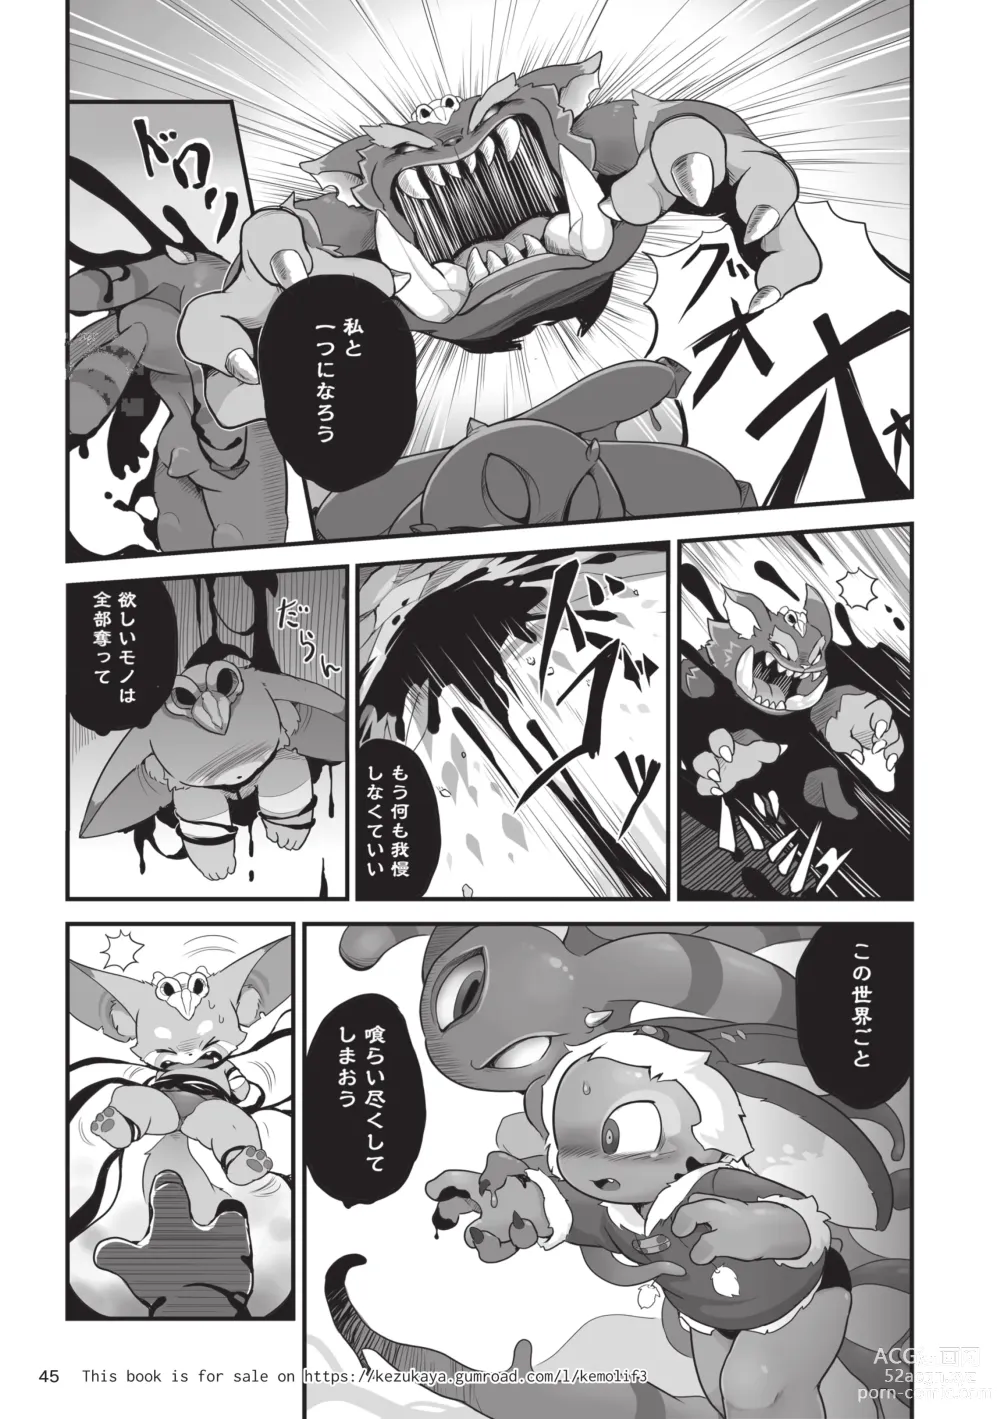 Page 45 of doujinshi Welcome to Kemmoners Rift!! Tri